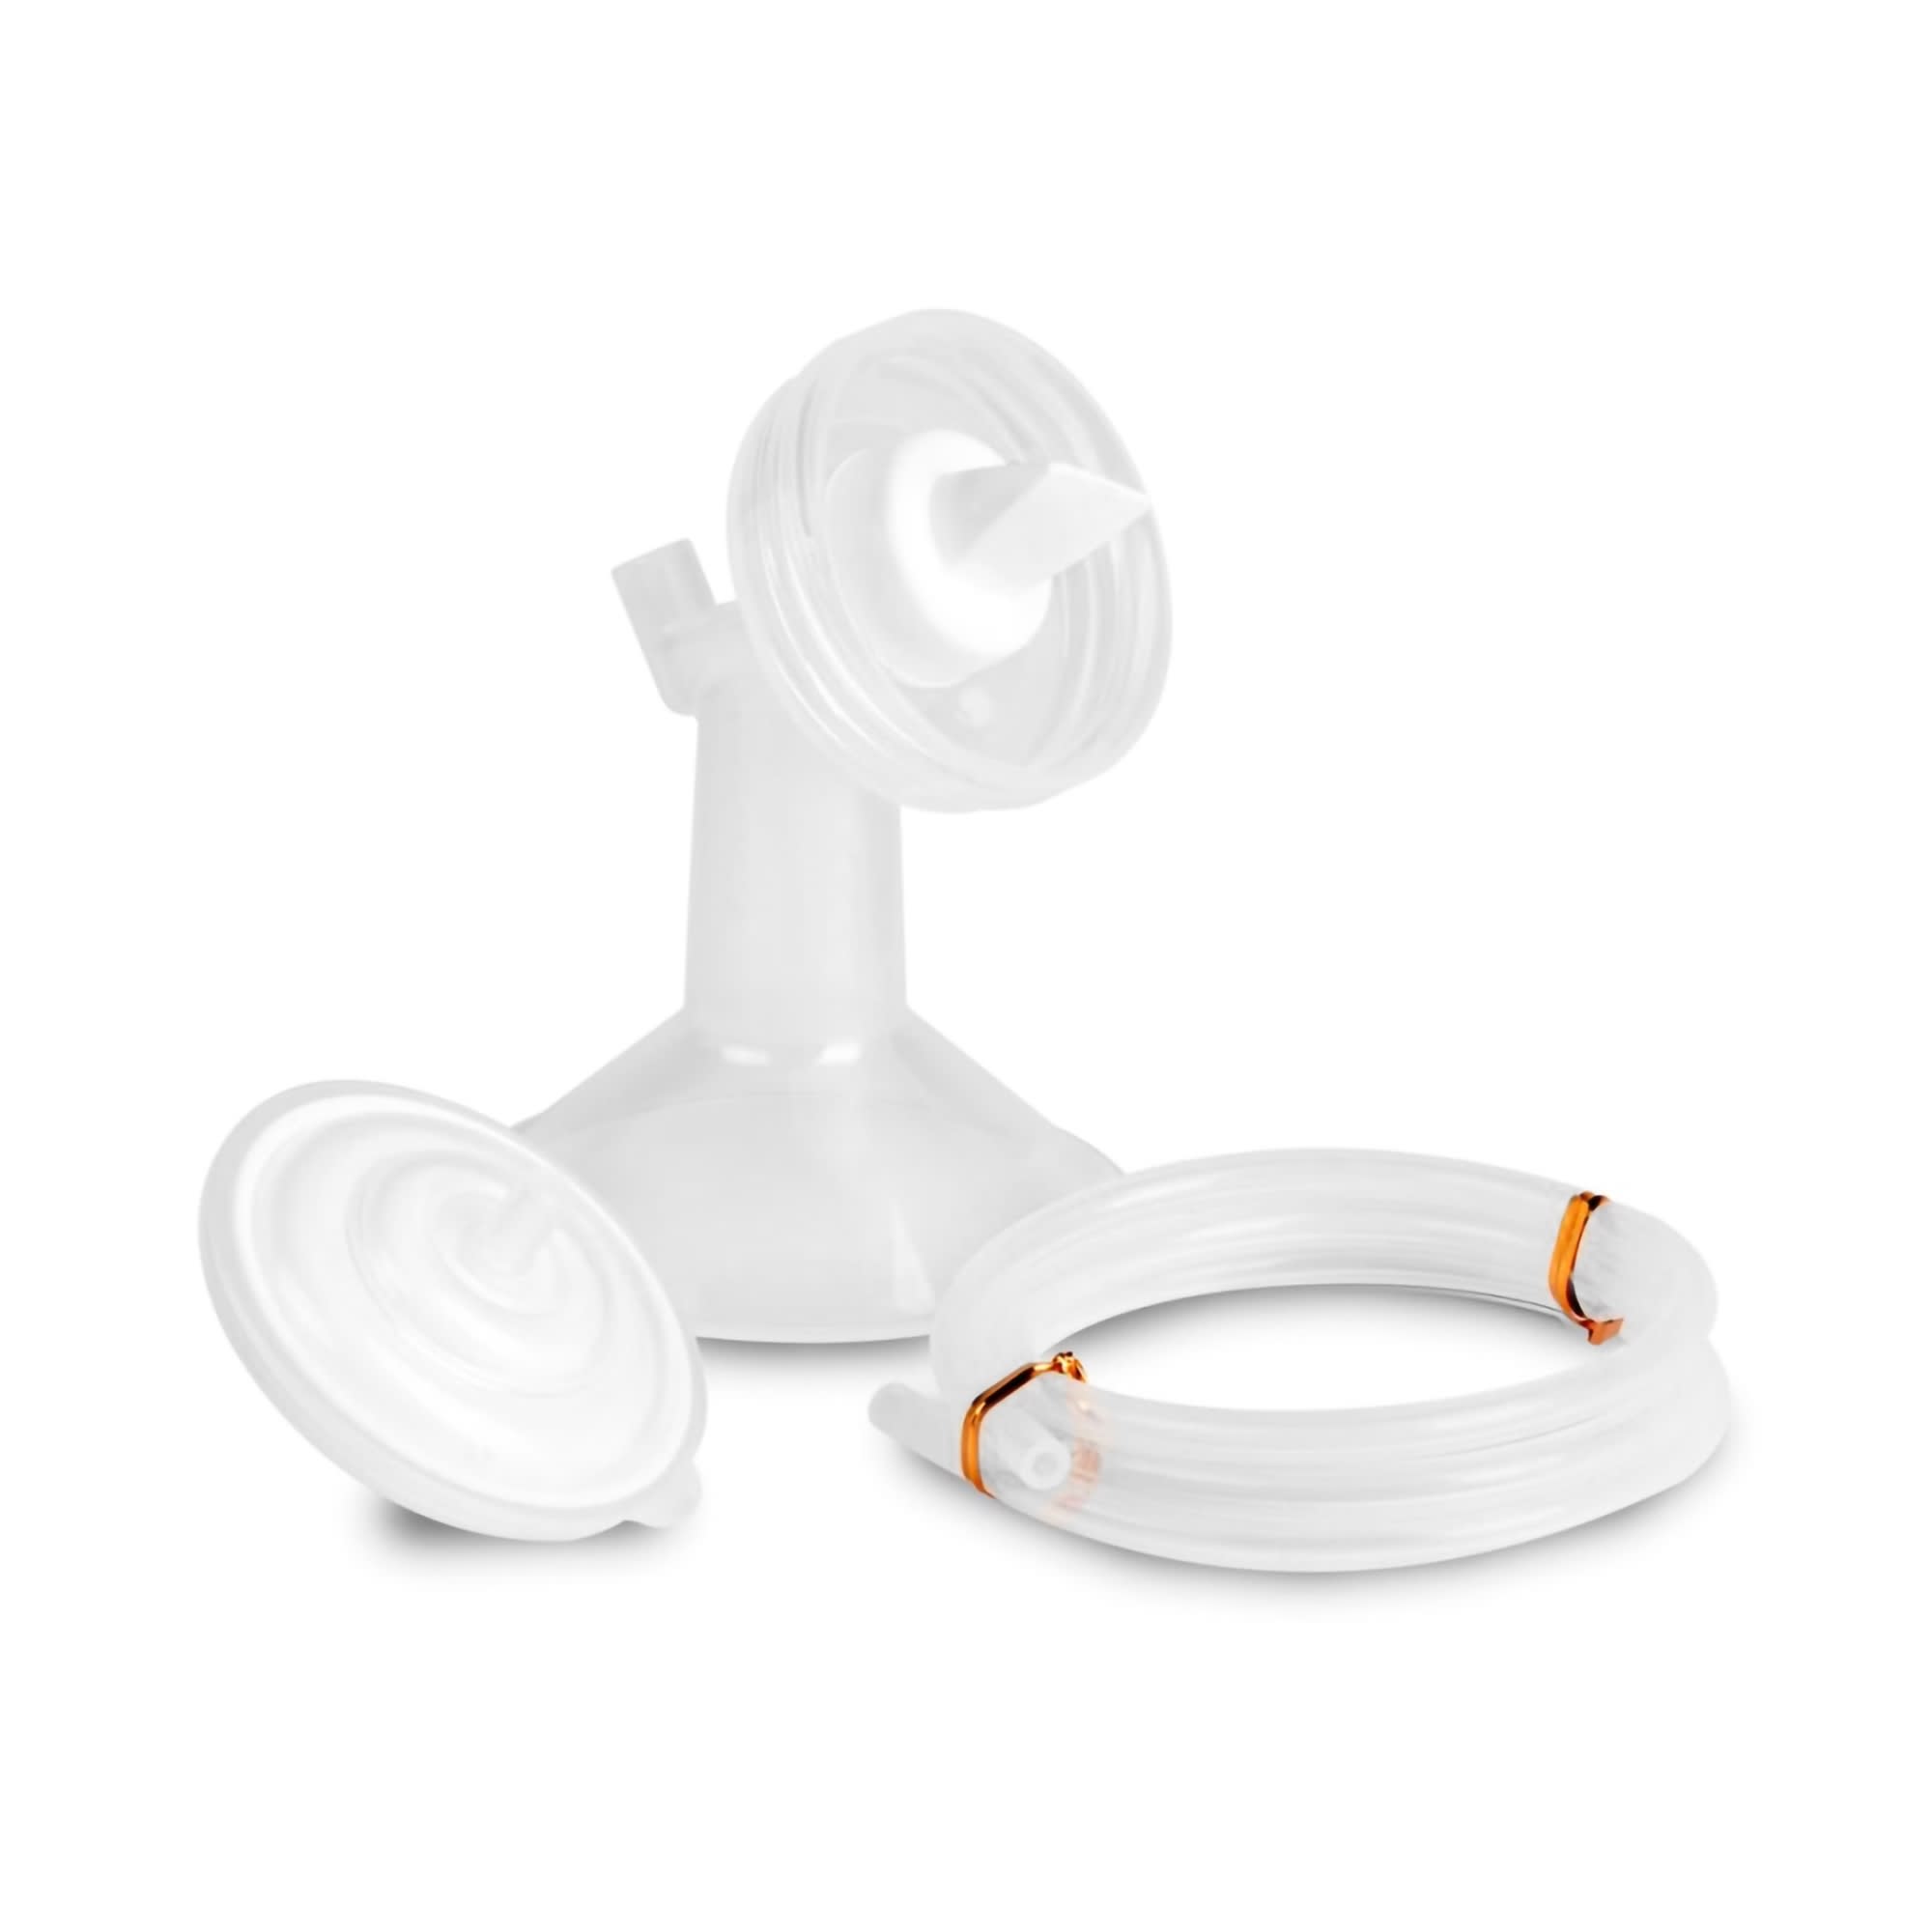 Spectra Synergy Gold Parts Kit - Backflow Protectors Valves and Tubing for  Synergy Gold breast pumps!